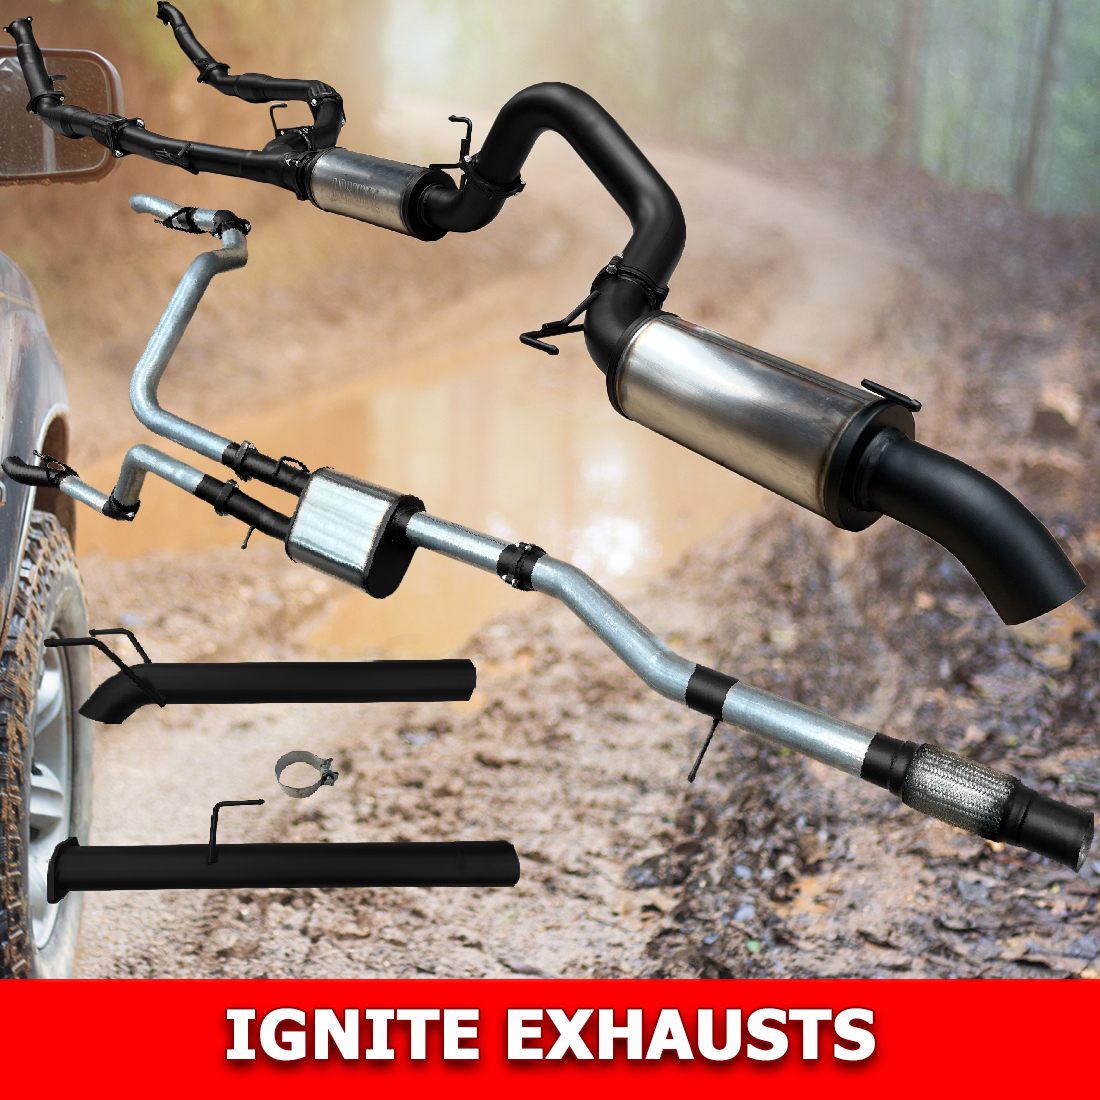 The best 4x4 & Perfomance Ignite Exhausts at Playtime Auto Parts.